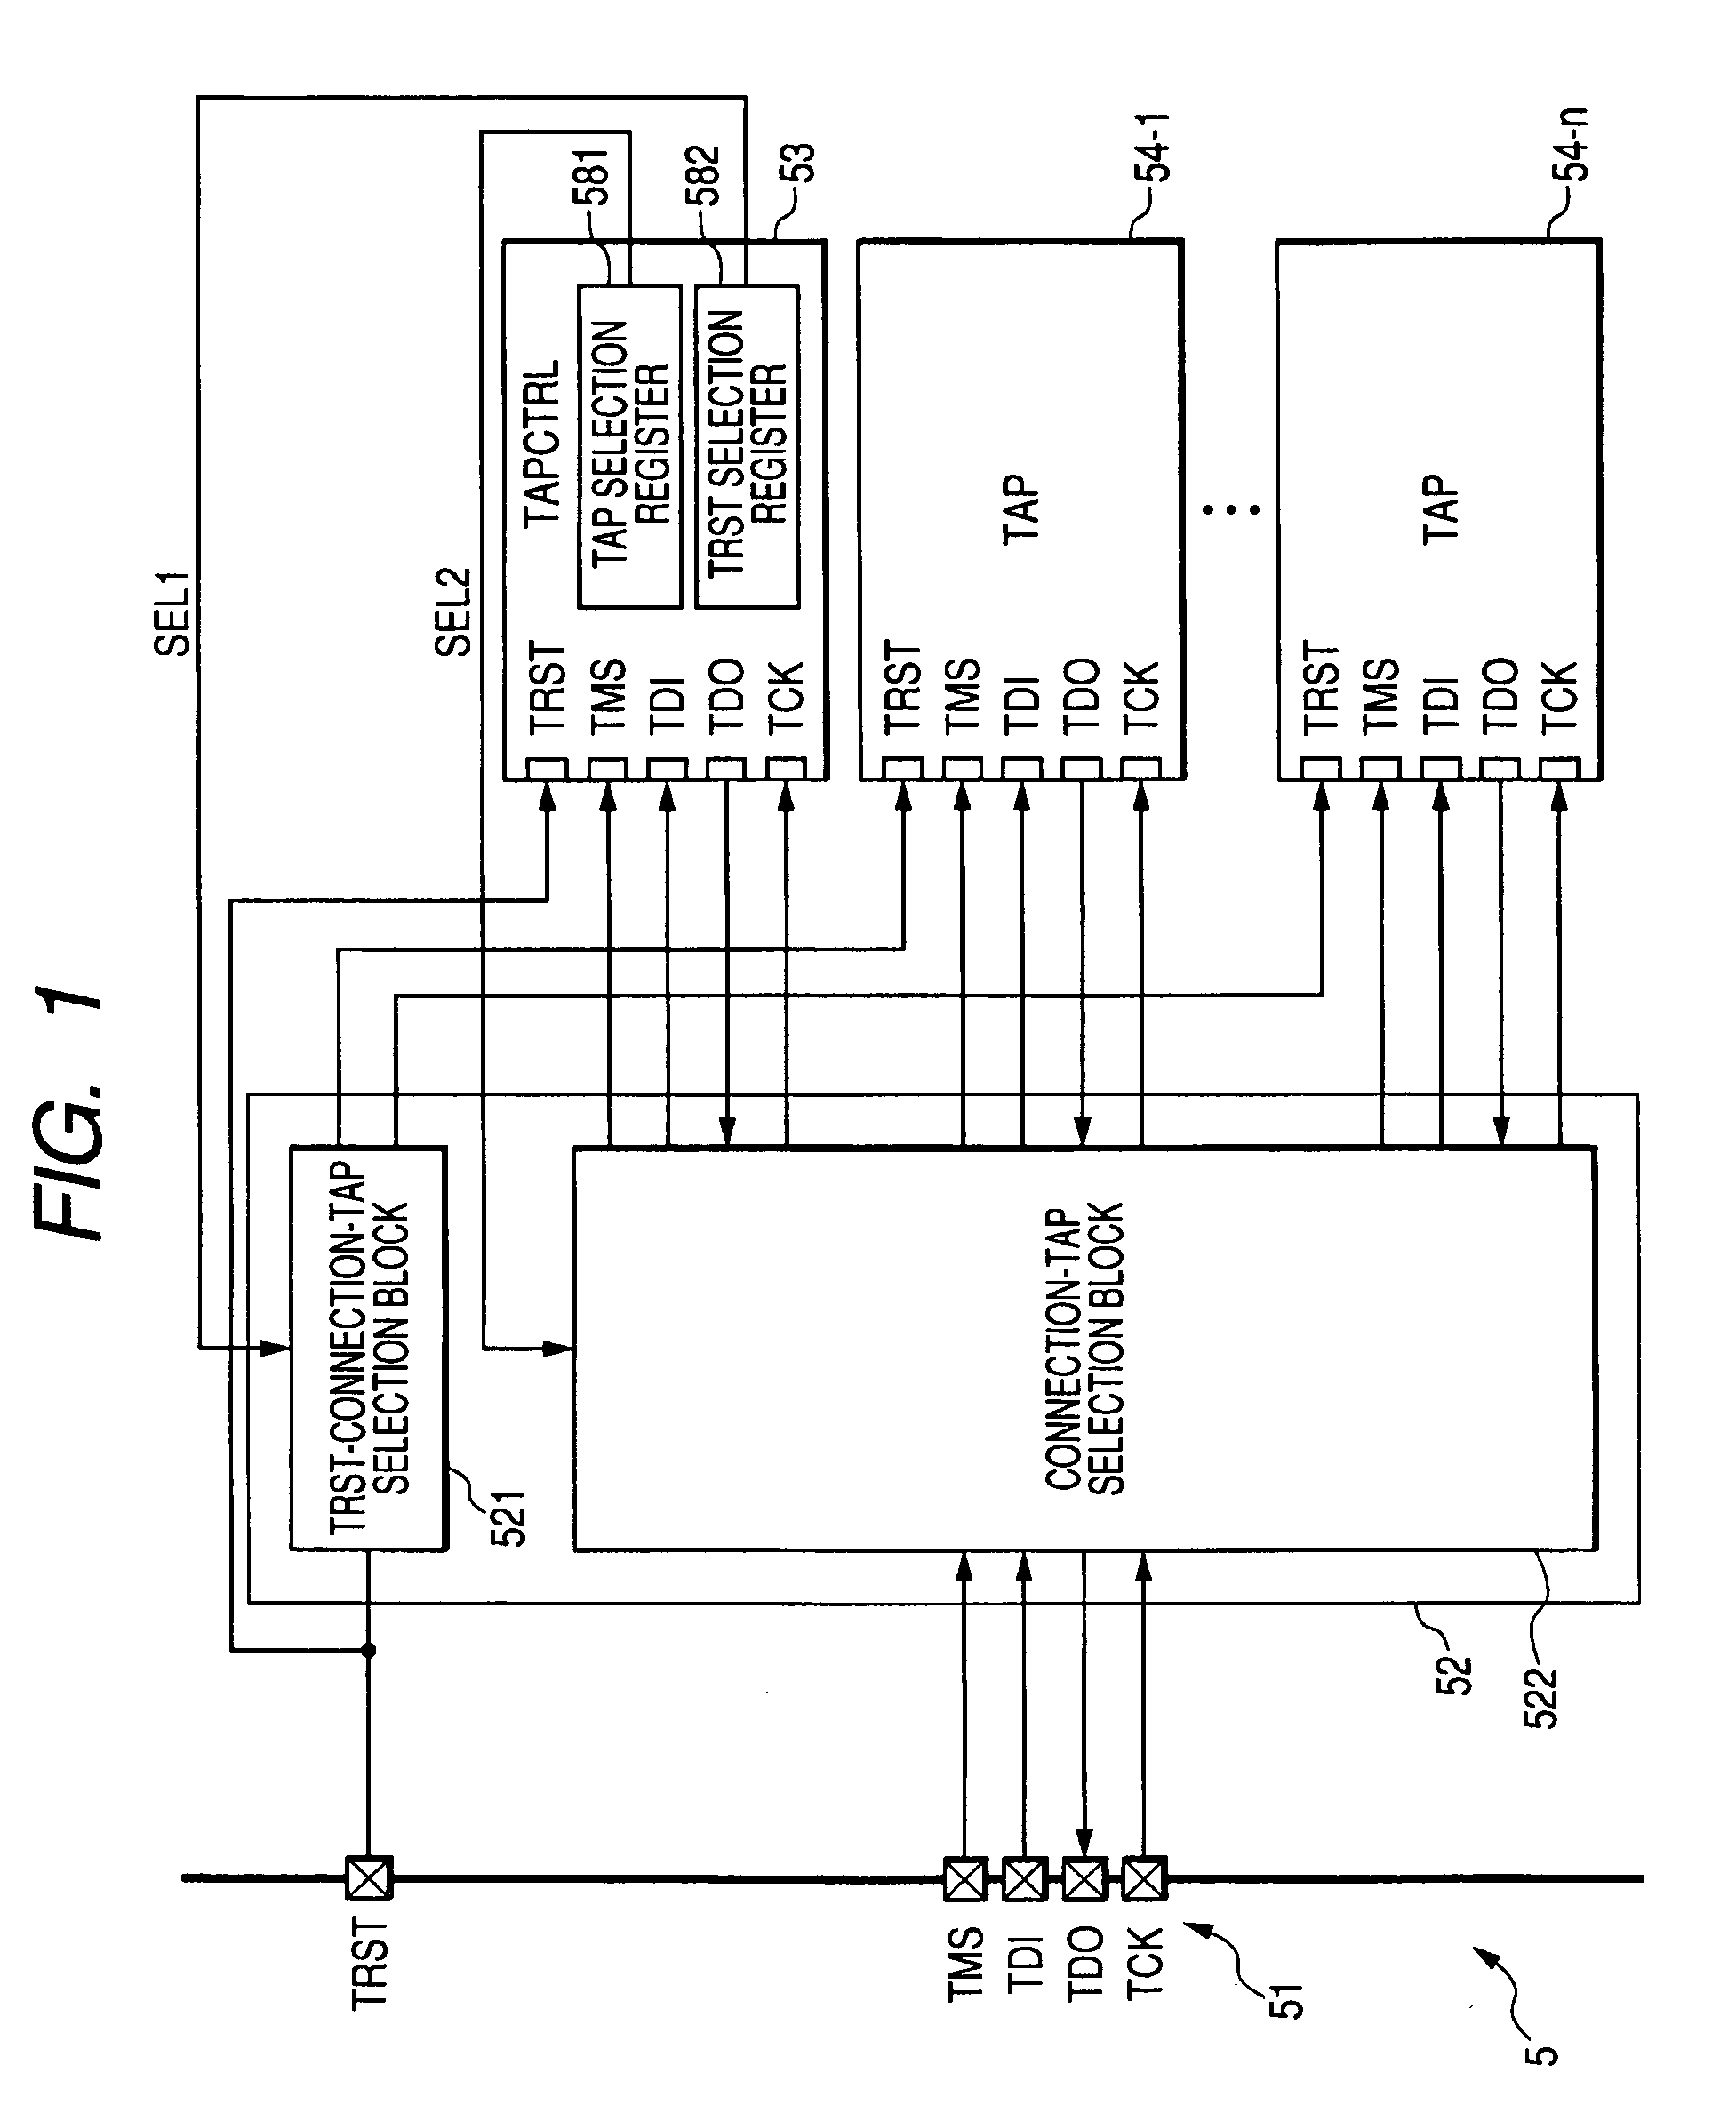 Test access control for plural processors of an integrated circuit